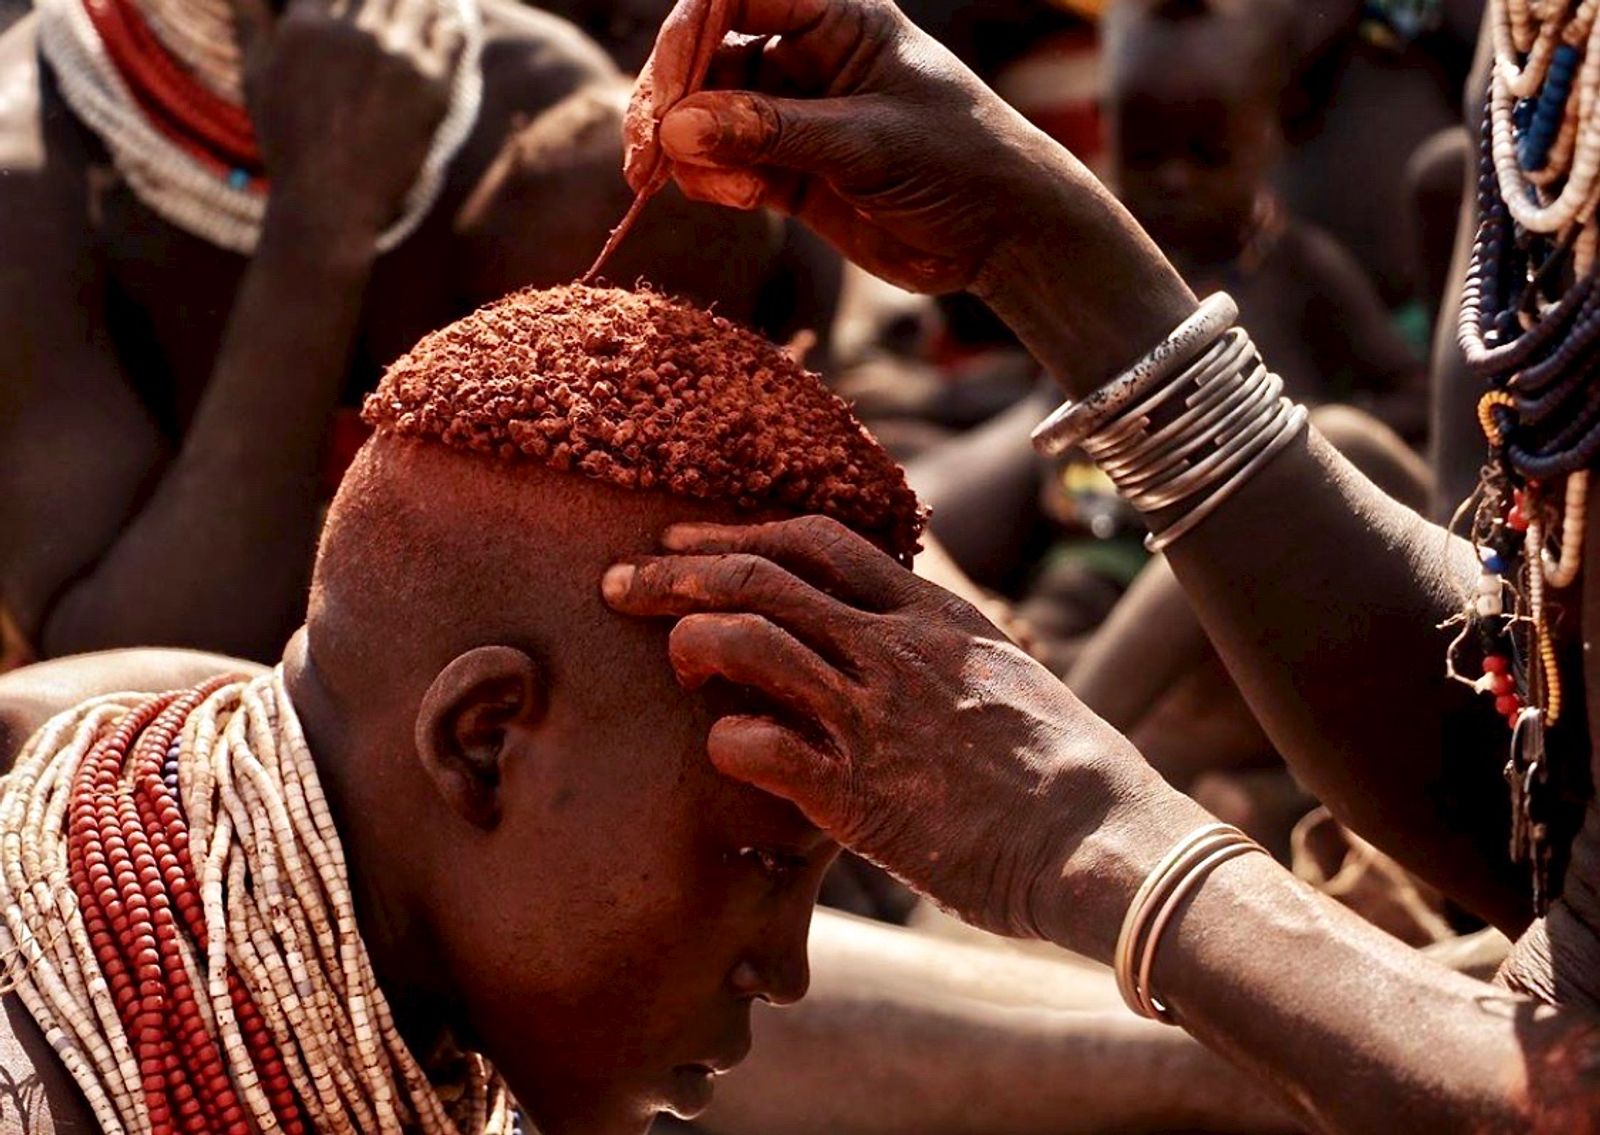 © Nwando Ebeledike - This photo was taken in Omo Valley, Ethiopia and is a photo of a tribe members